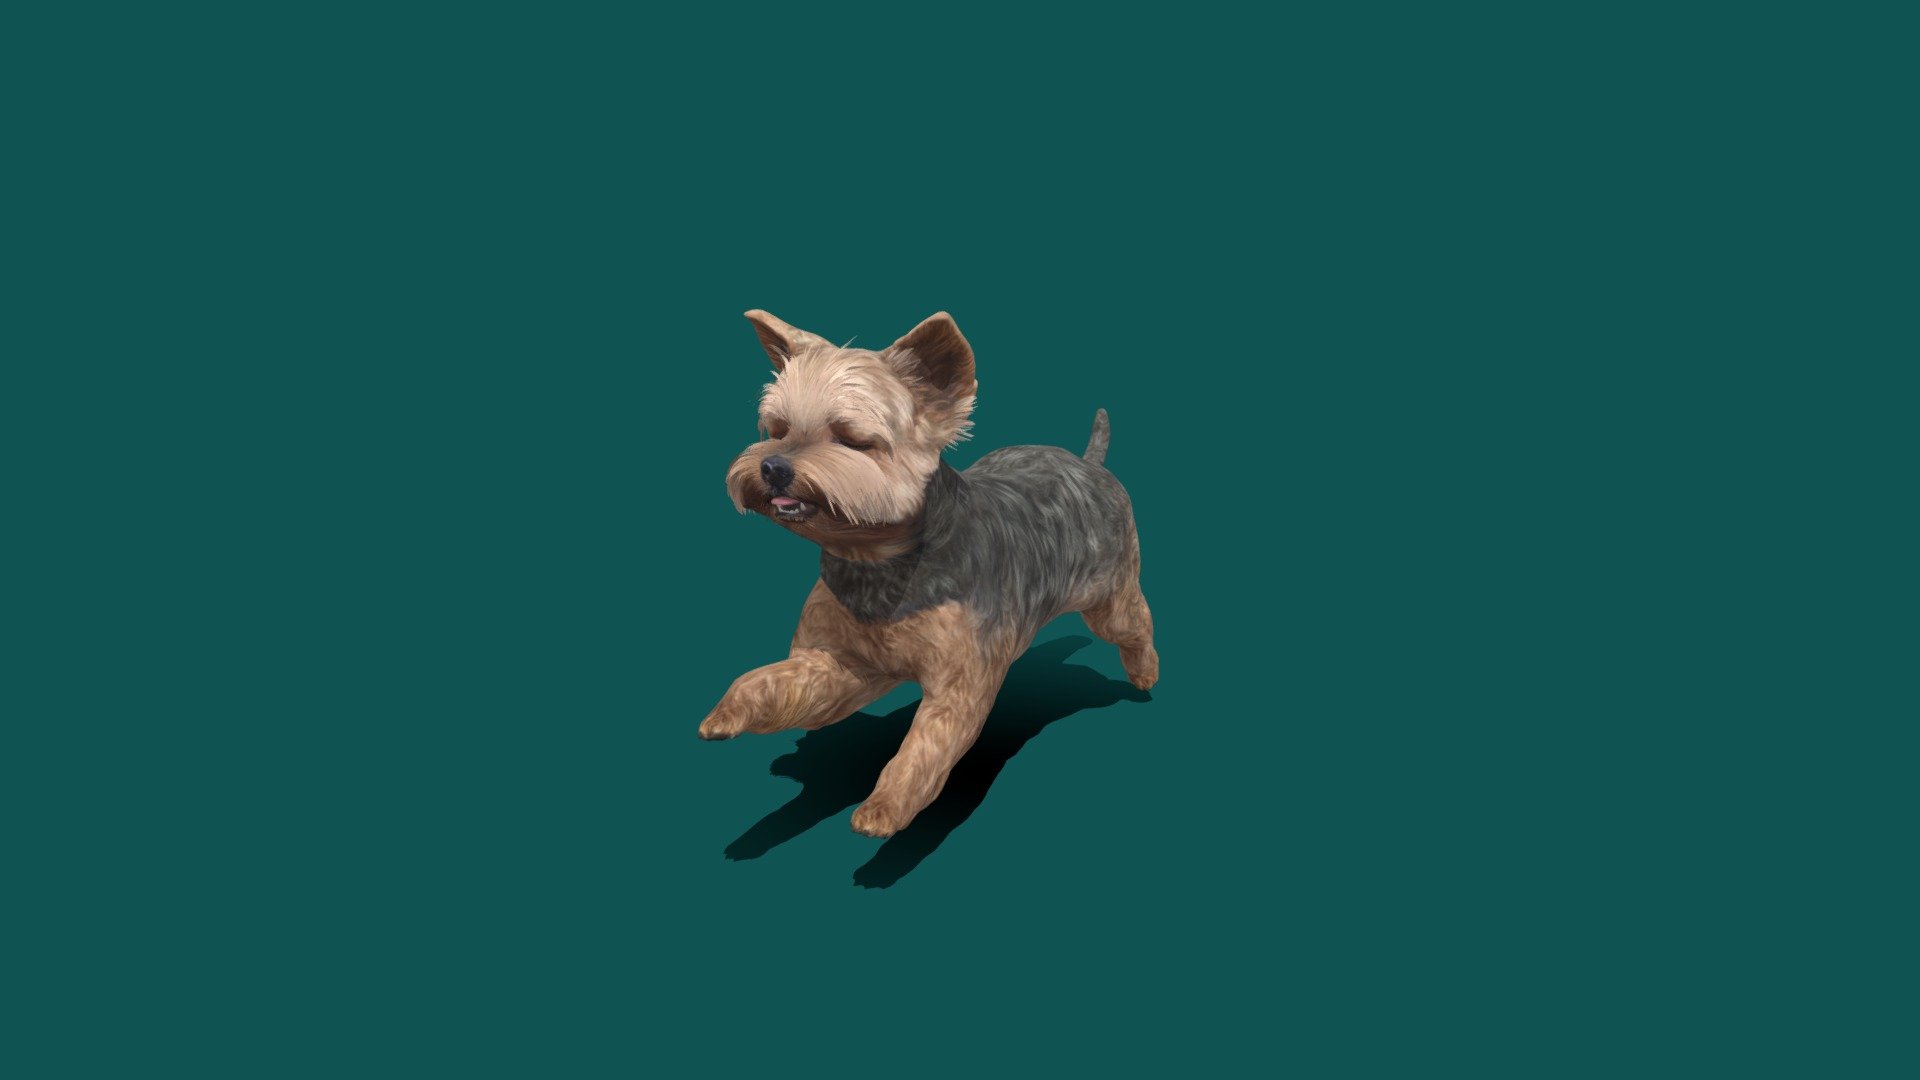 Yorkshireterrier Game Ready
Animations
Run
Idle
Sit
Walk
The Yorkshire Terrier is one of the smallest dog breeds of the terrier type and indeed of any dog breed. The breed developed during the 19th century in Yorkshire, England. Ideally its maximum size is 7 pounds 3d model